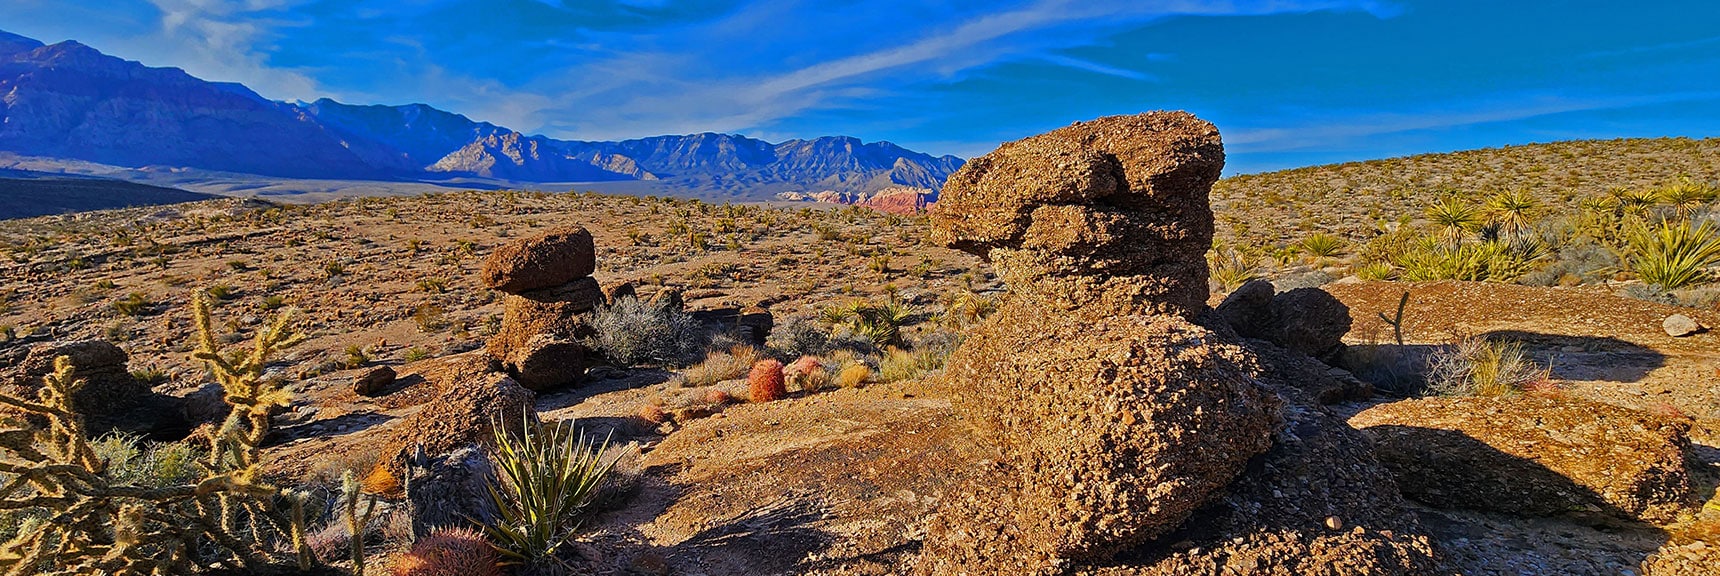 More Pillars, Red Rock Canyon Background | Western Trails and Ridges | Blue Diamond Hill | Red Rock Canyon, Nevada